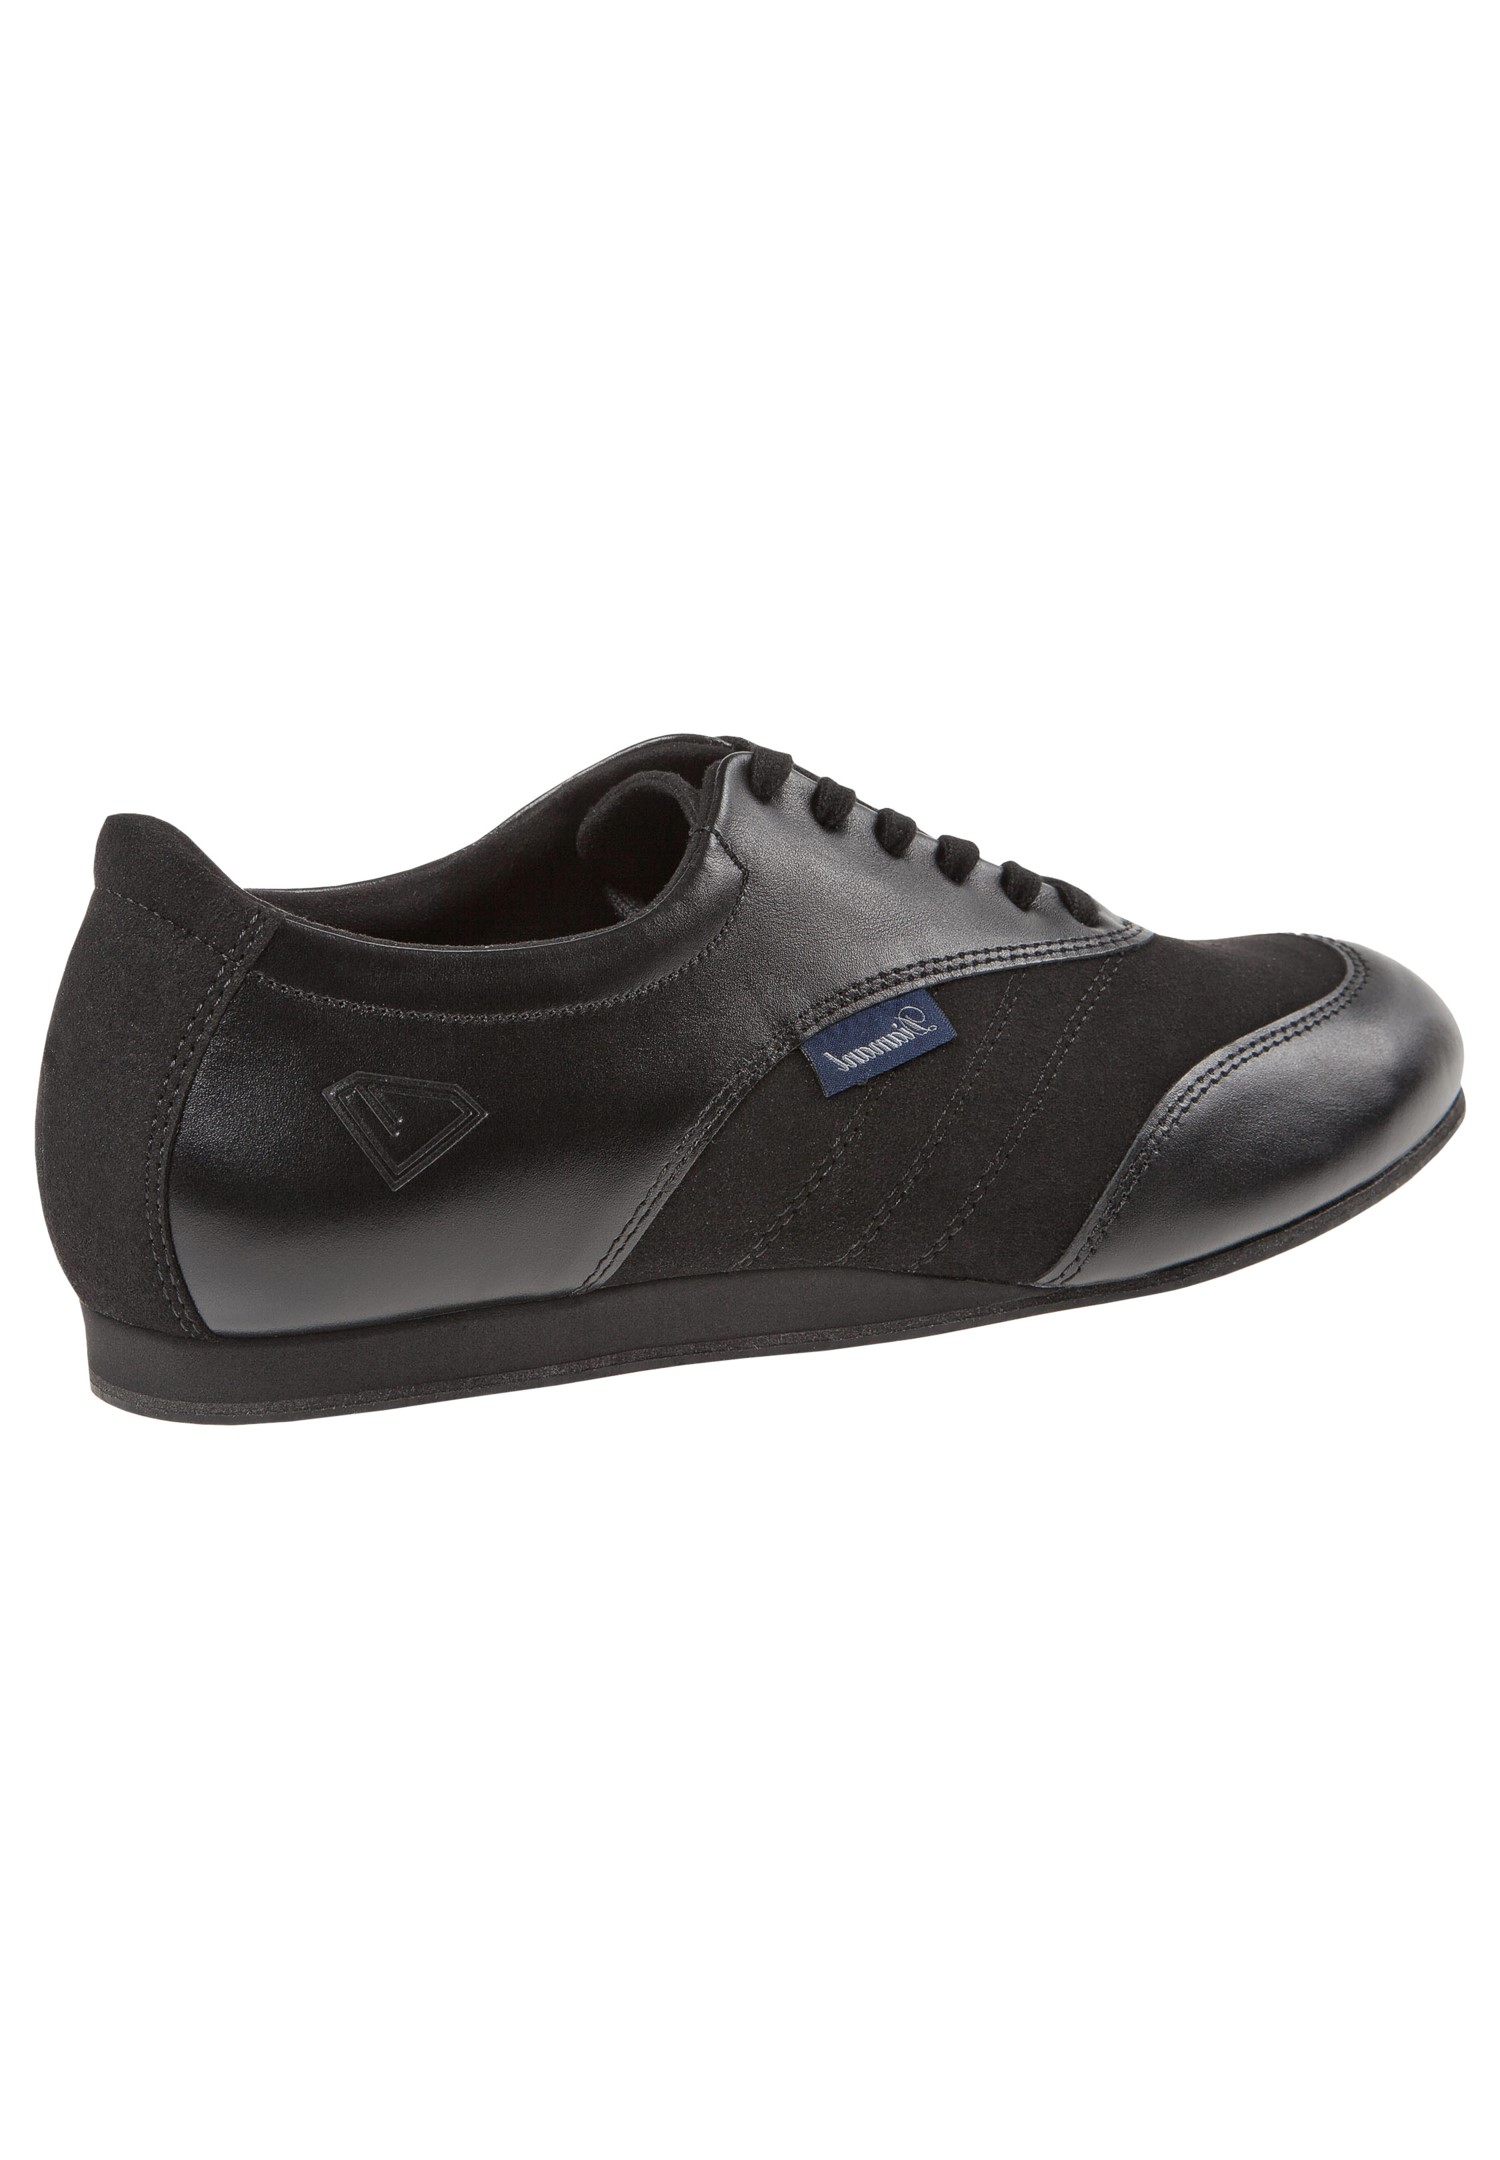 Truffle Collection wide fit formal monk shoes in black